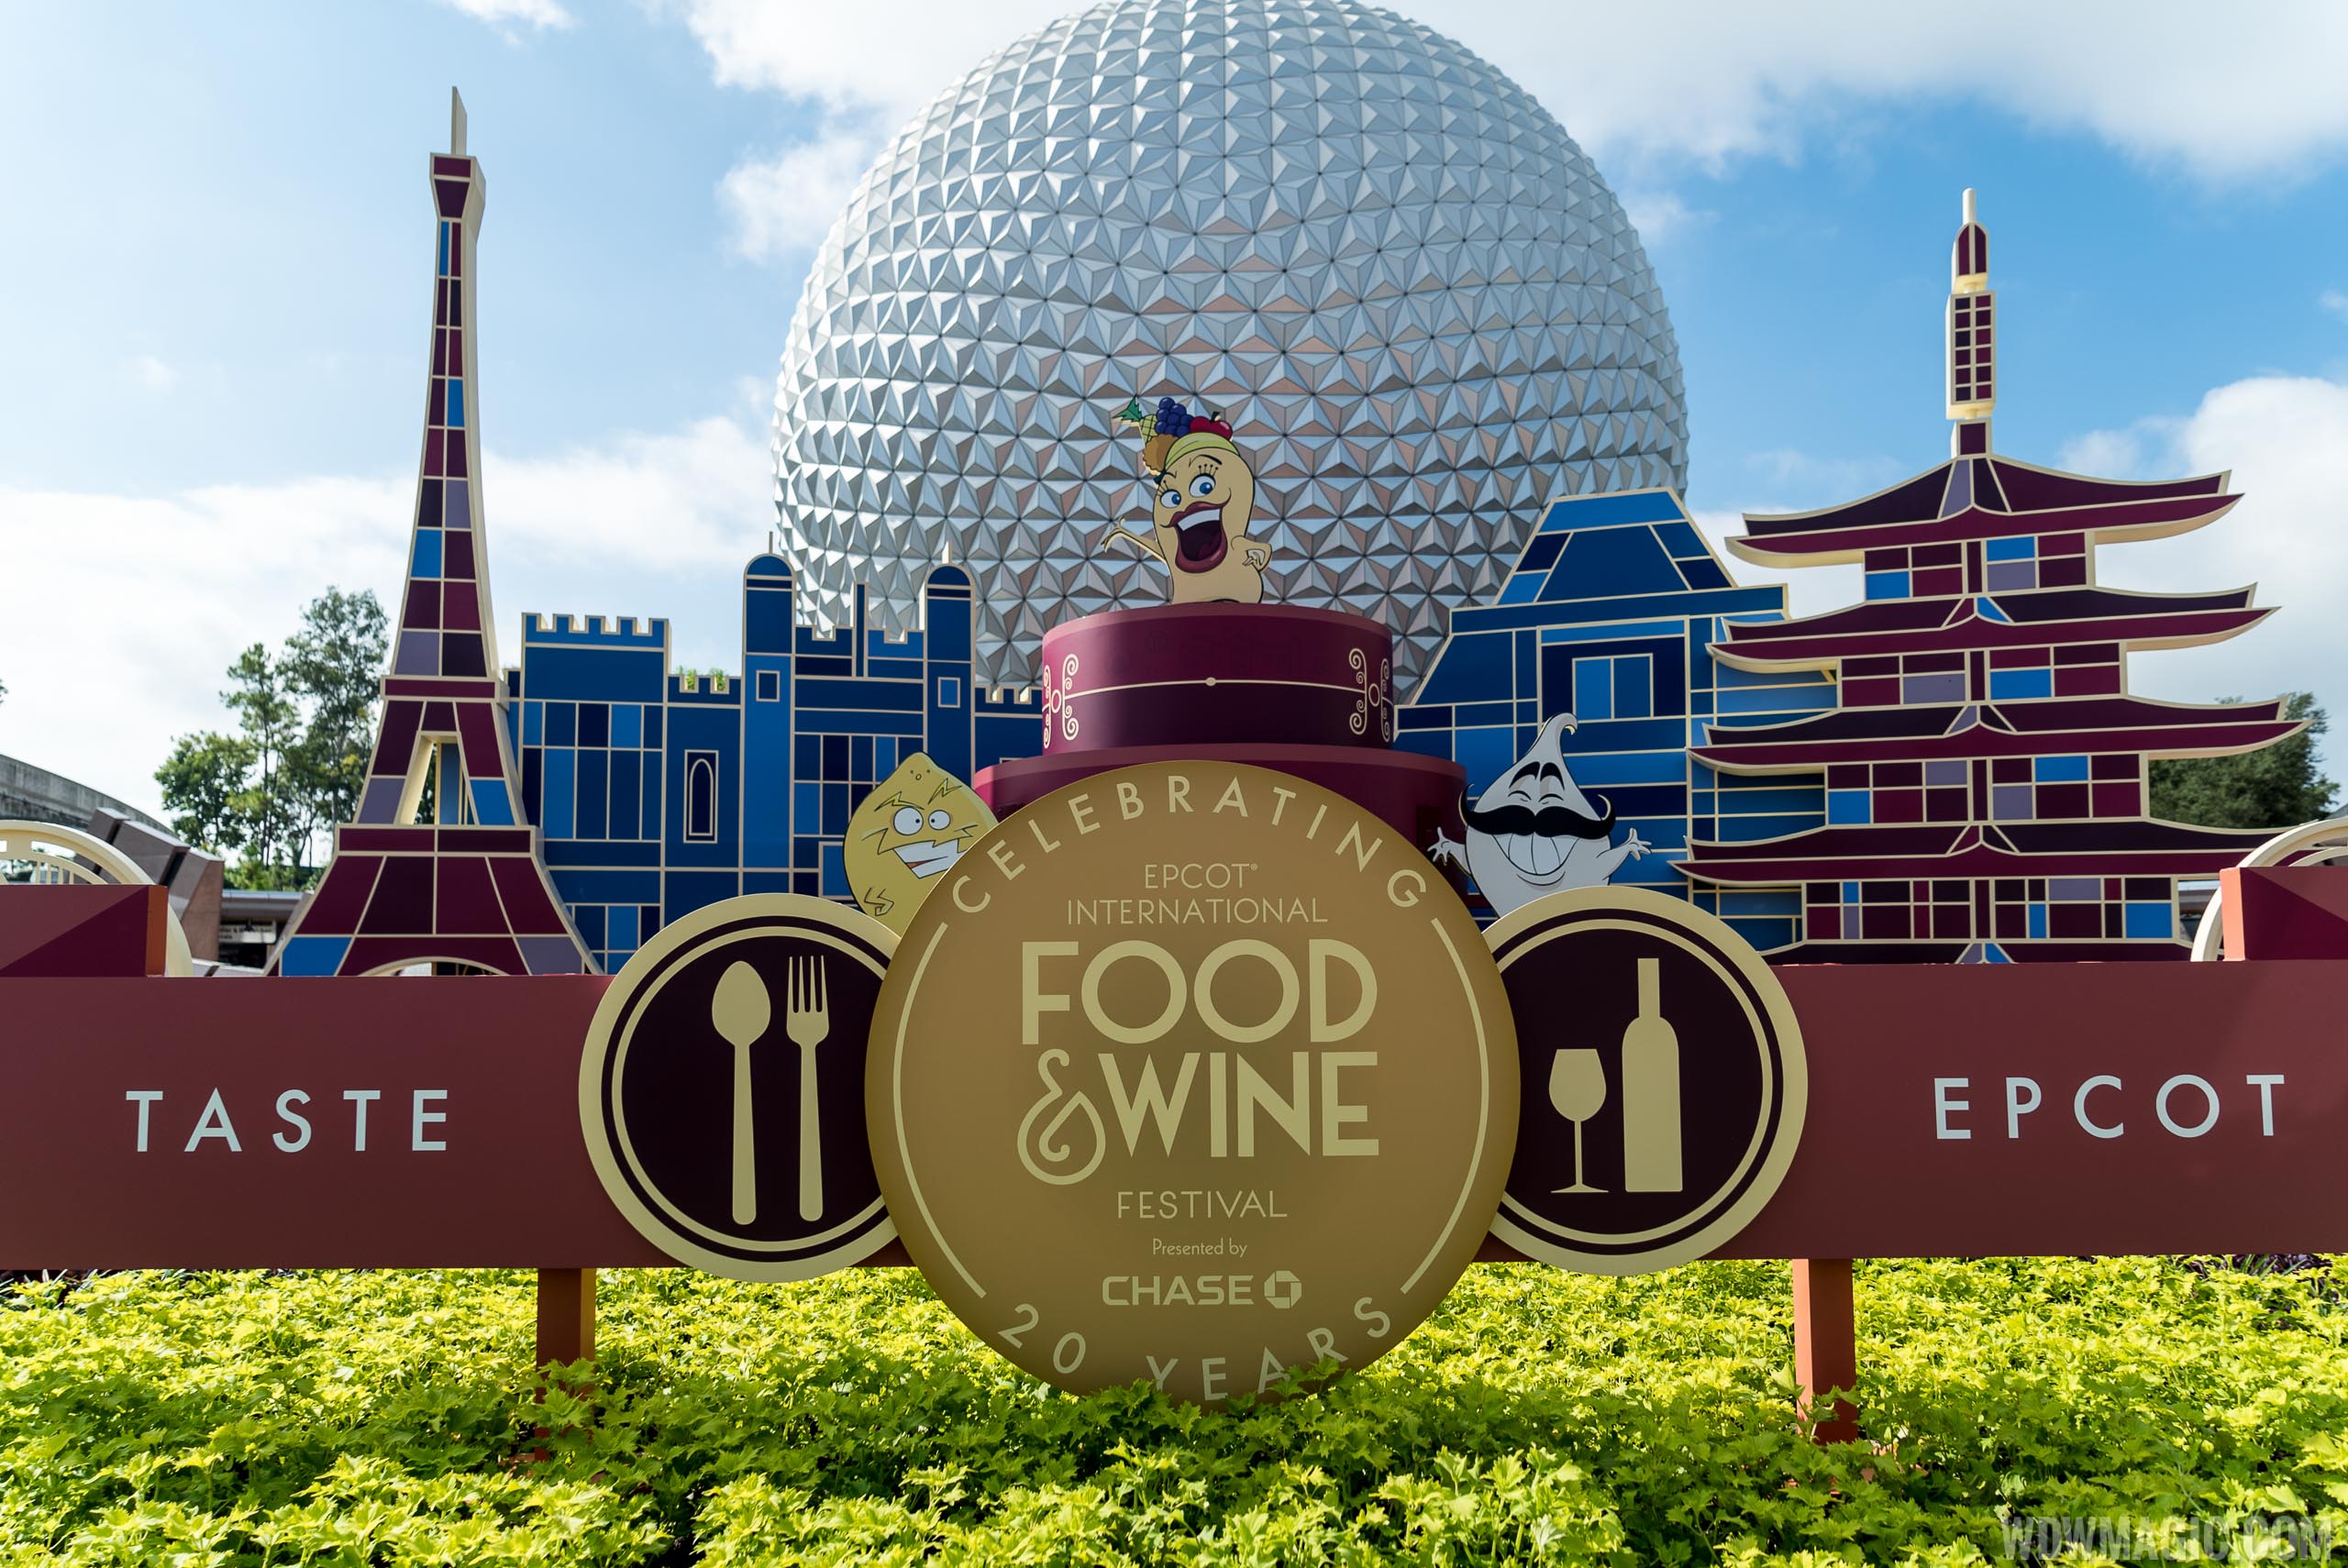 PHOTOS First tastes at Epcot's new Food and Wine Festival 'Next Eats